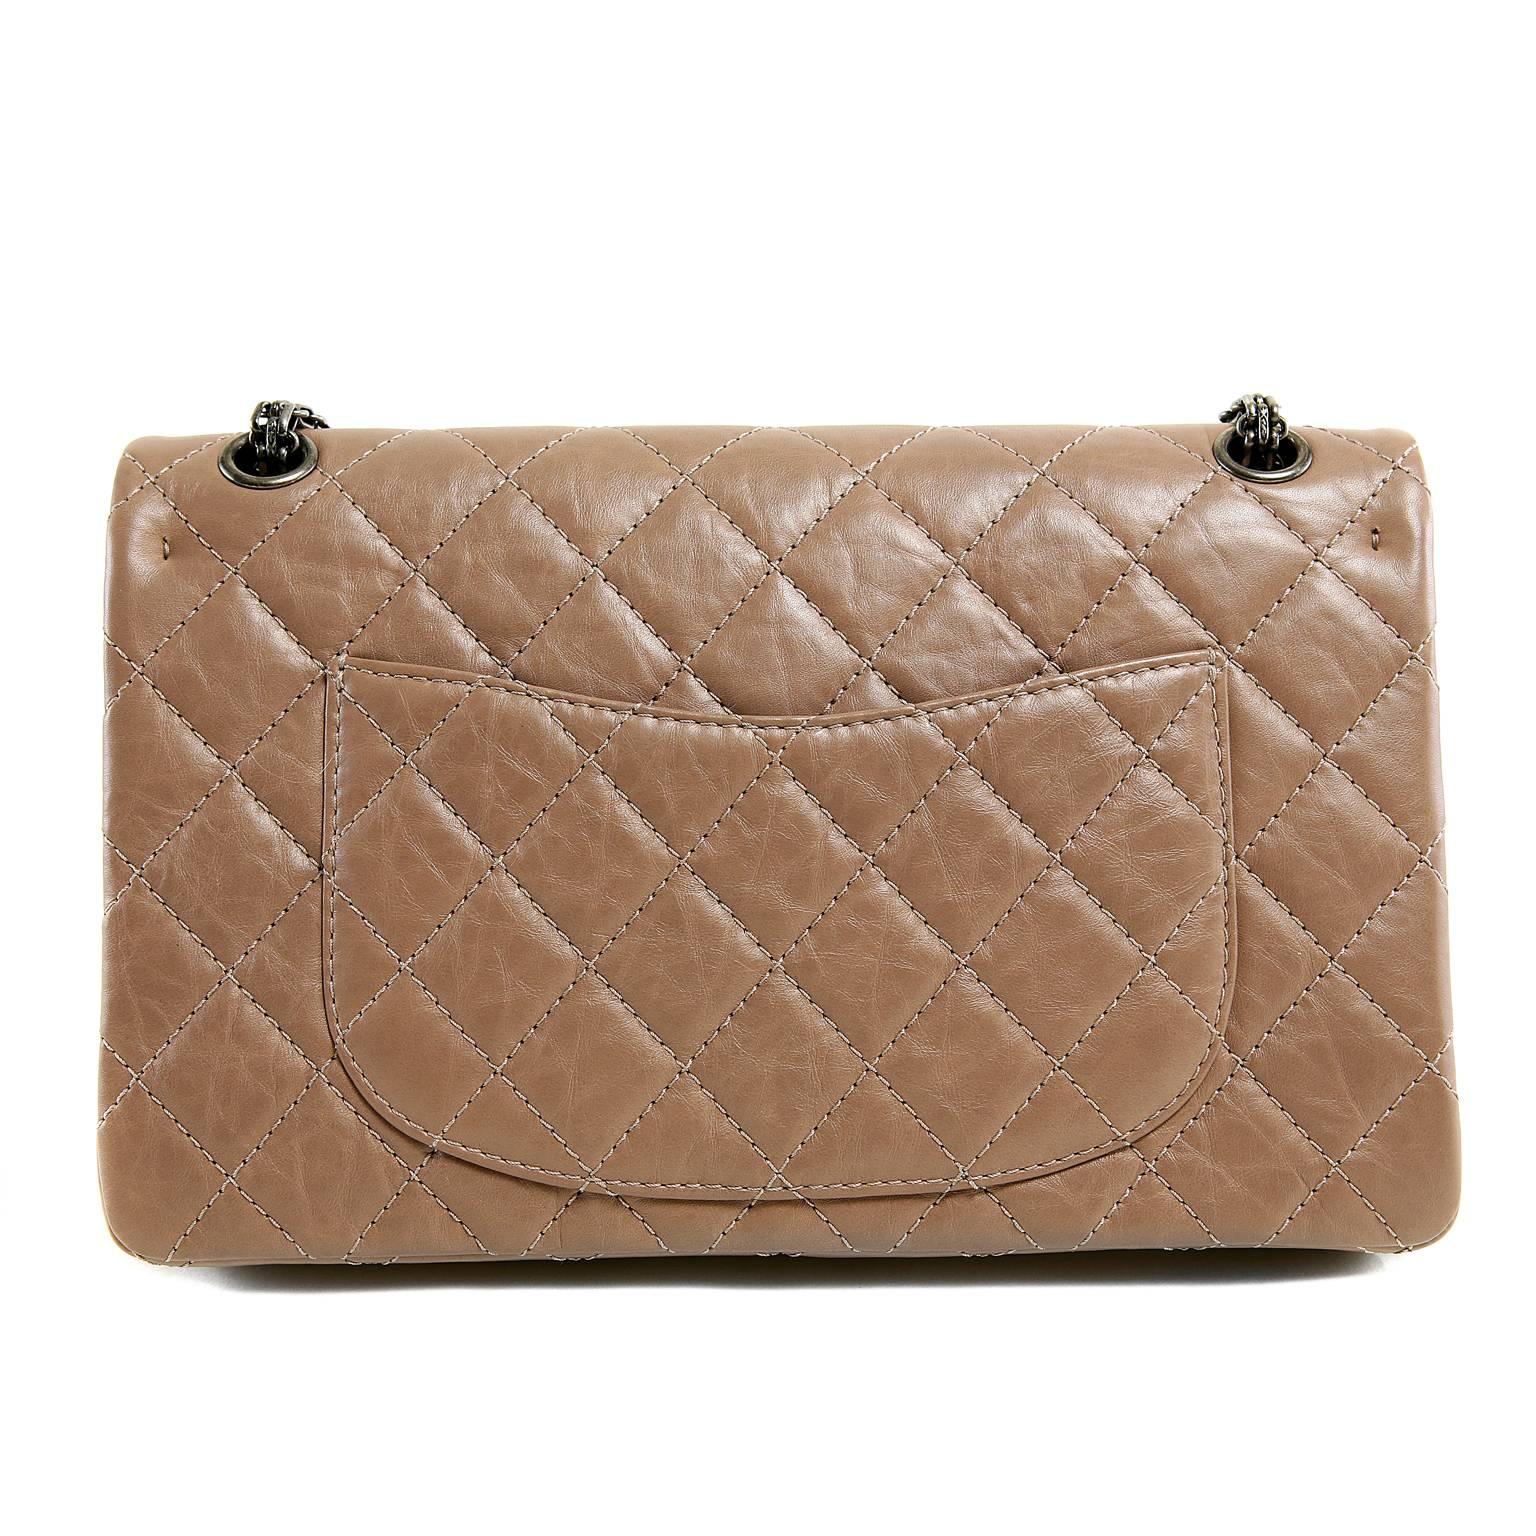 Chanel Camel Leather 2.55 Reissue Flap Bag- PRISTINE
Uniquely distressed leather and edgy Ruthenium hardware make this neutral classic an especially desirable piece. 
 
Warm caramel colored distressed leather is quilted in signature Chanel